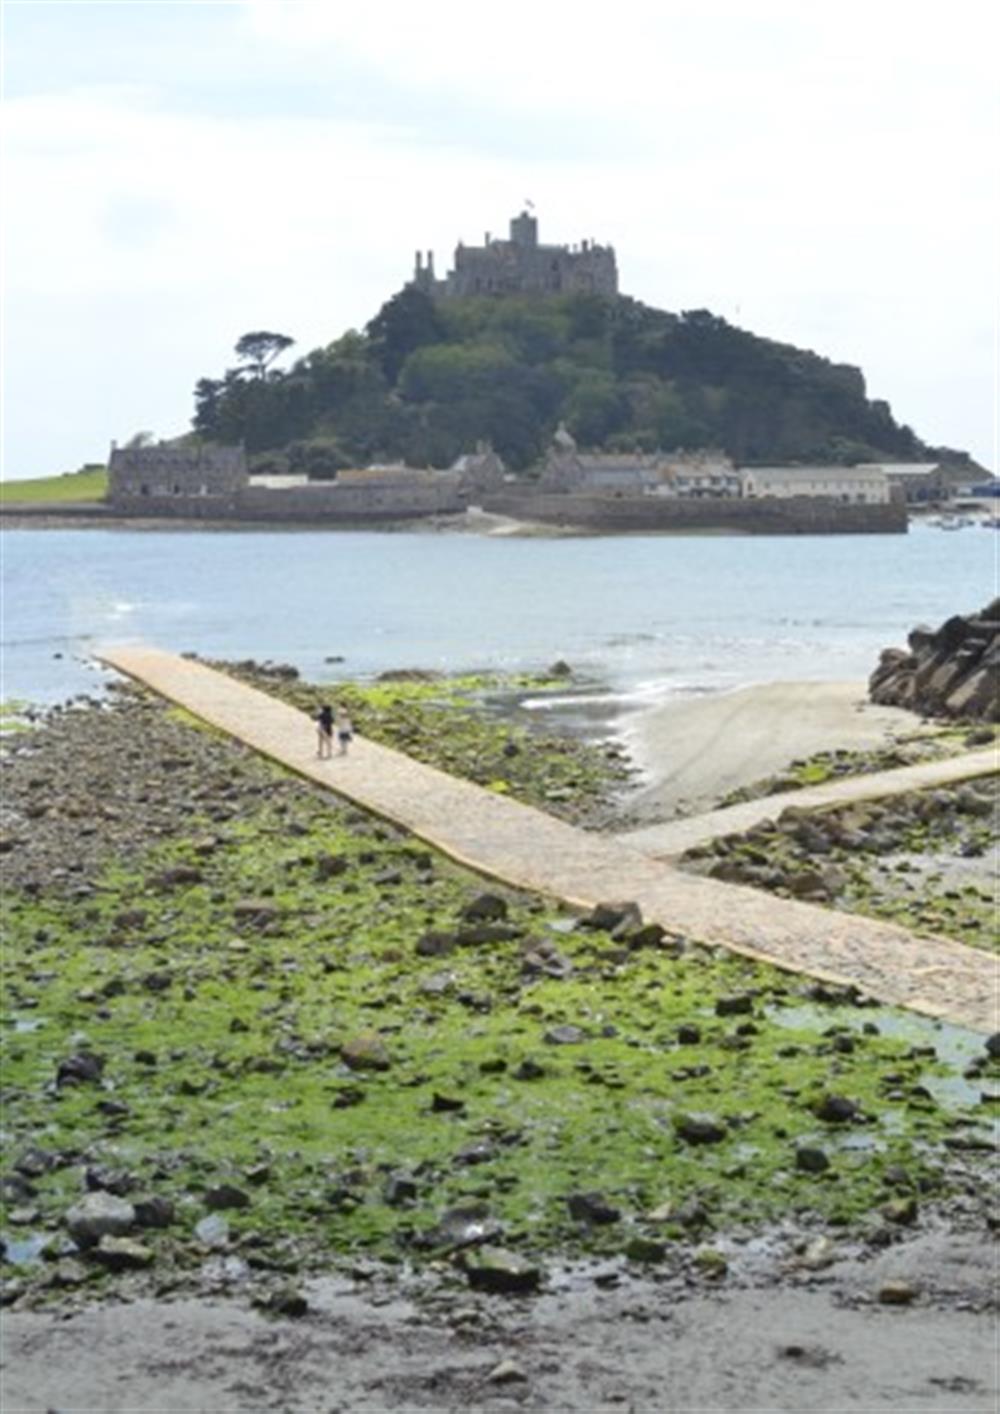 St Michael's Mount is a forty minute drive from The Round Field Annex. Walk across the causeway or catch the water taxi, depending on what the tide's like. at Round Field Annex in Mawnan Smith